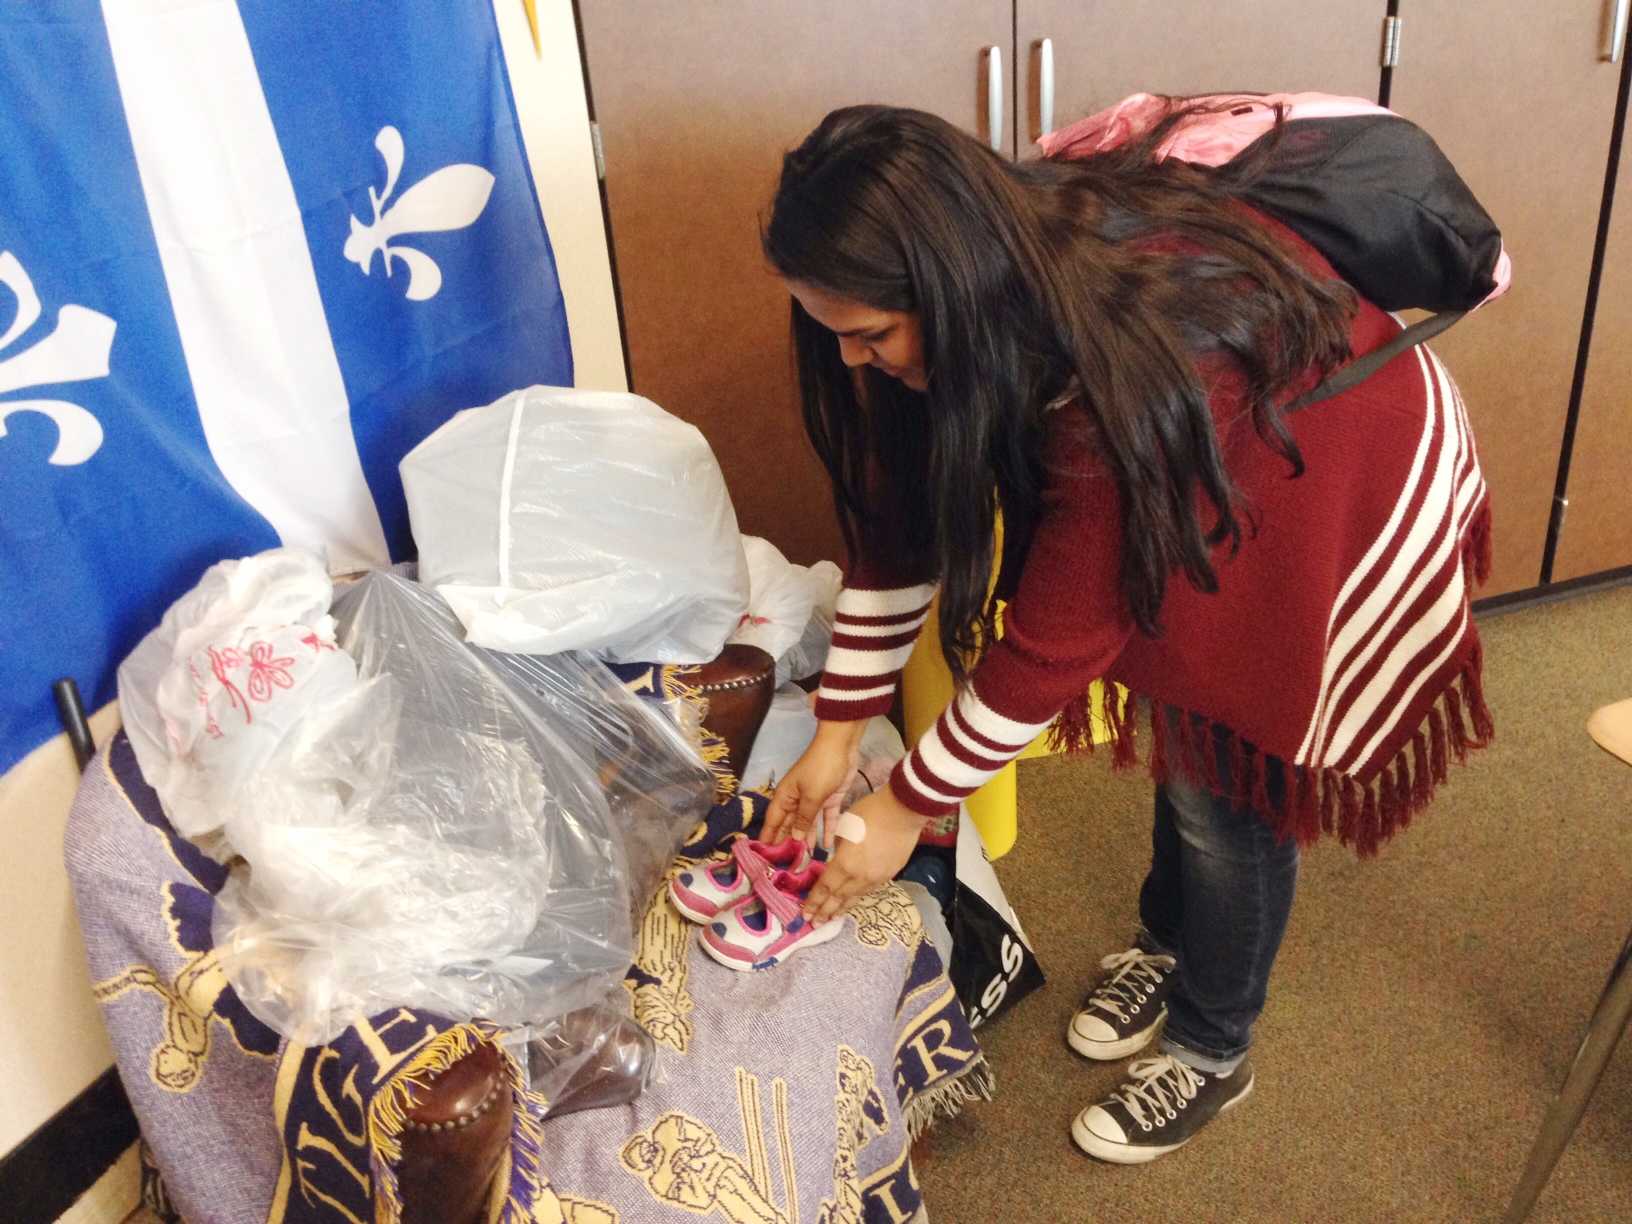 
















Tania Torres, a student at Tracy High donates a pair of shoes for the school shoe drive.





